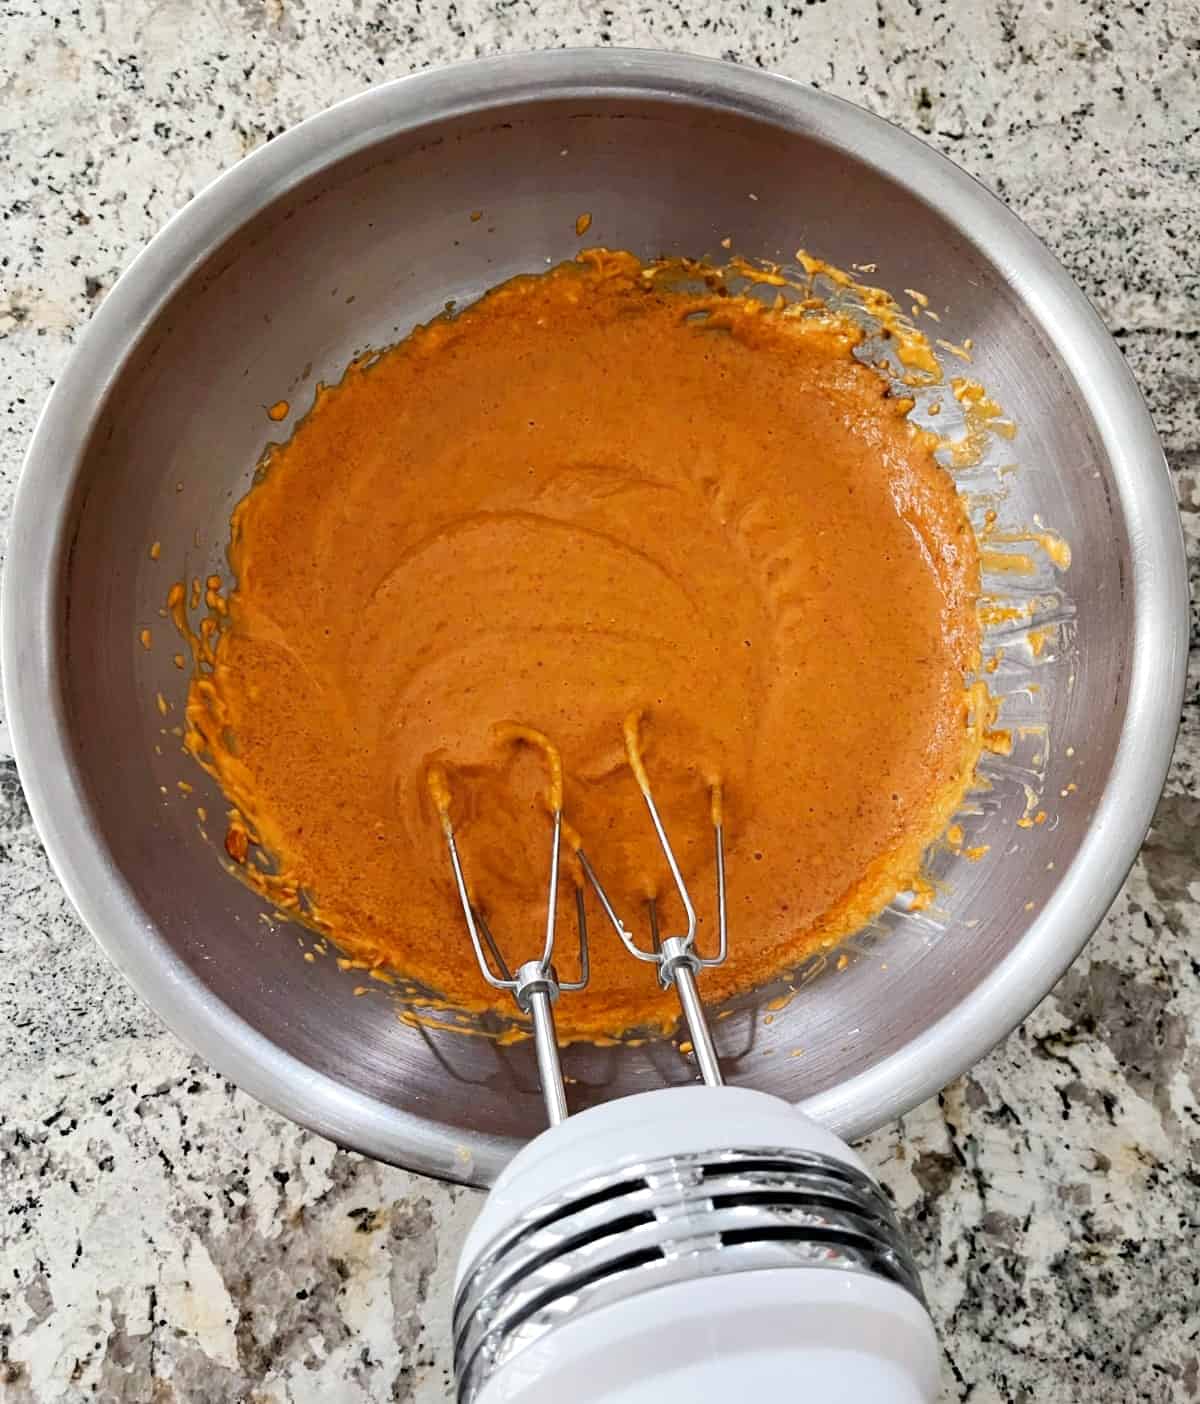 Beating light cream cheese, pure pumpkin, cornstarch, eggs, Truvia, brown sugar, cinnamon, ginger, nutmeg and vanilla with electric hand mixer in stainless bowl.